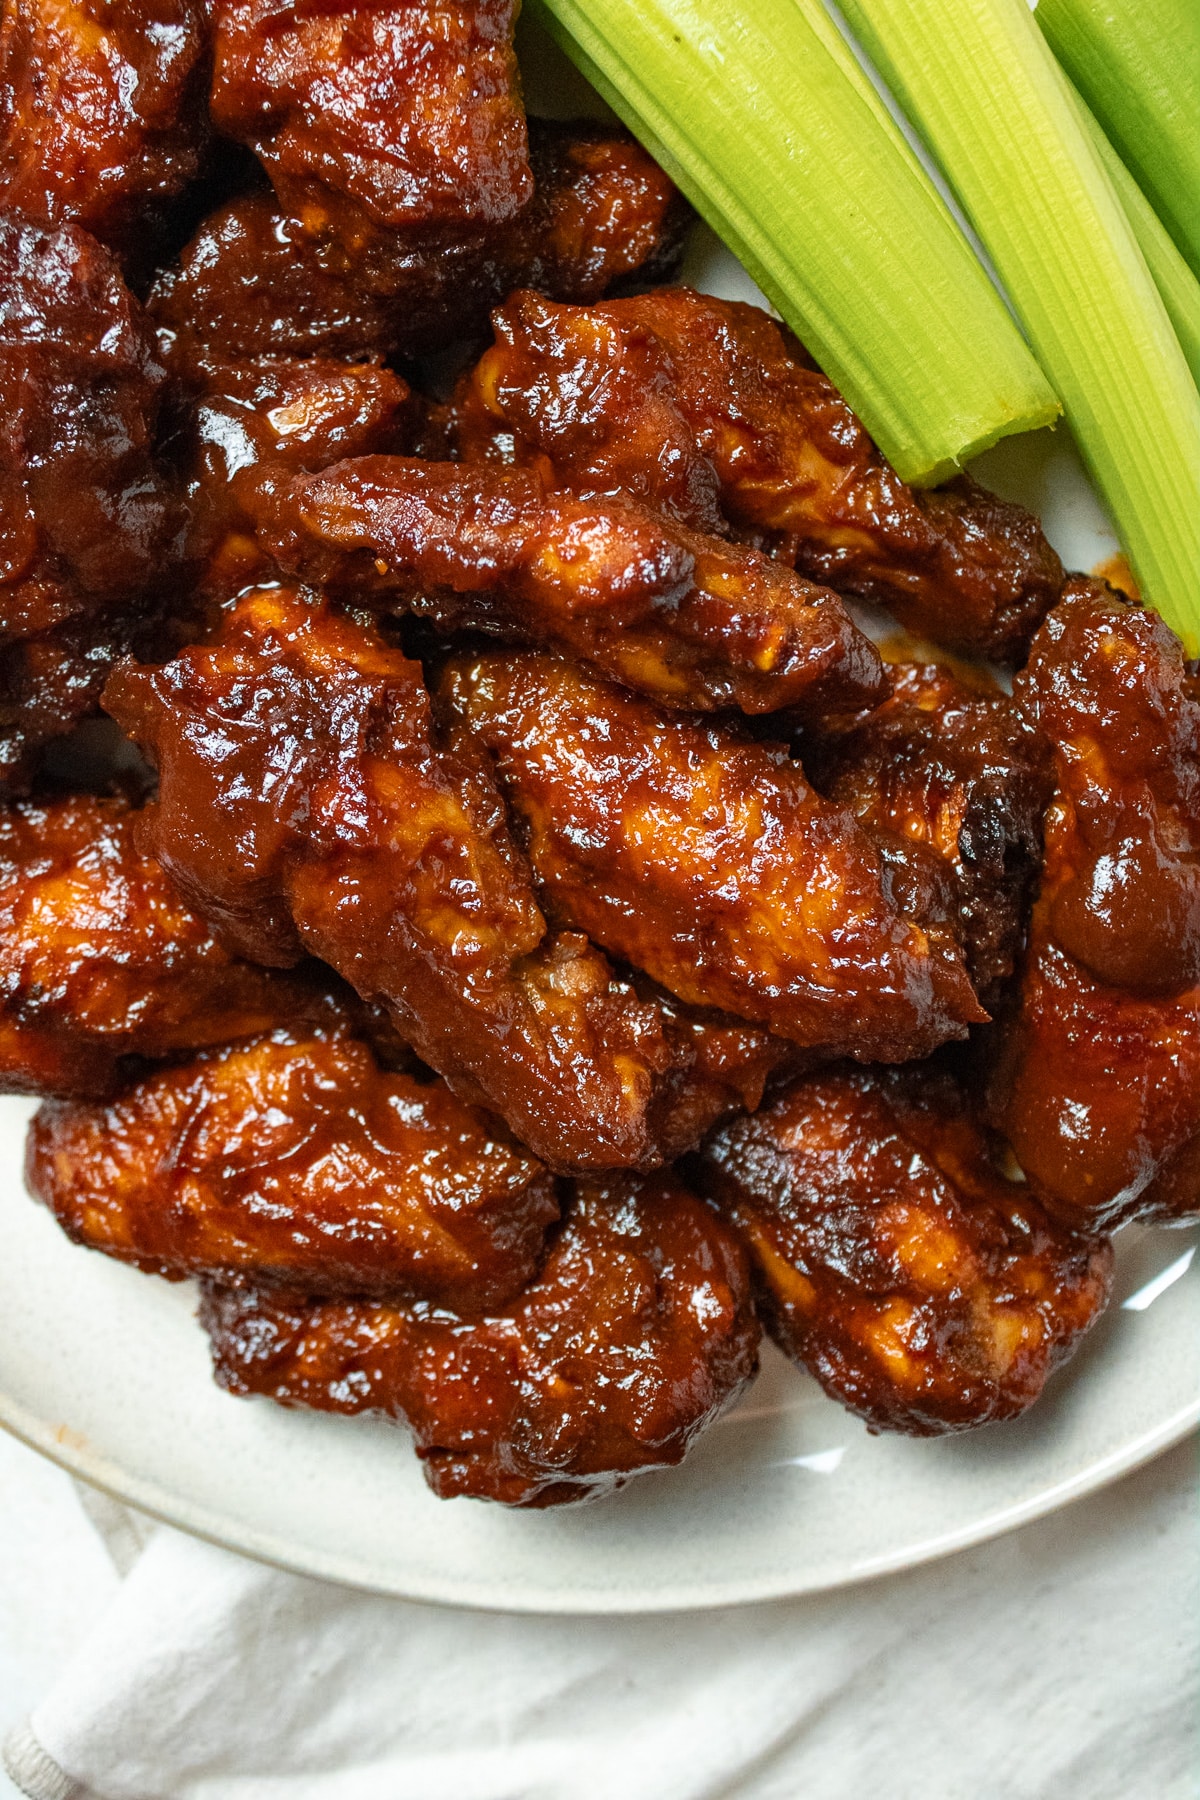 BBQ chicken wings on a plate with celery sticks.